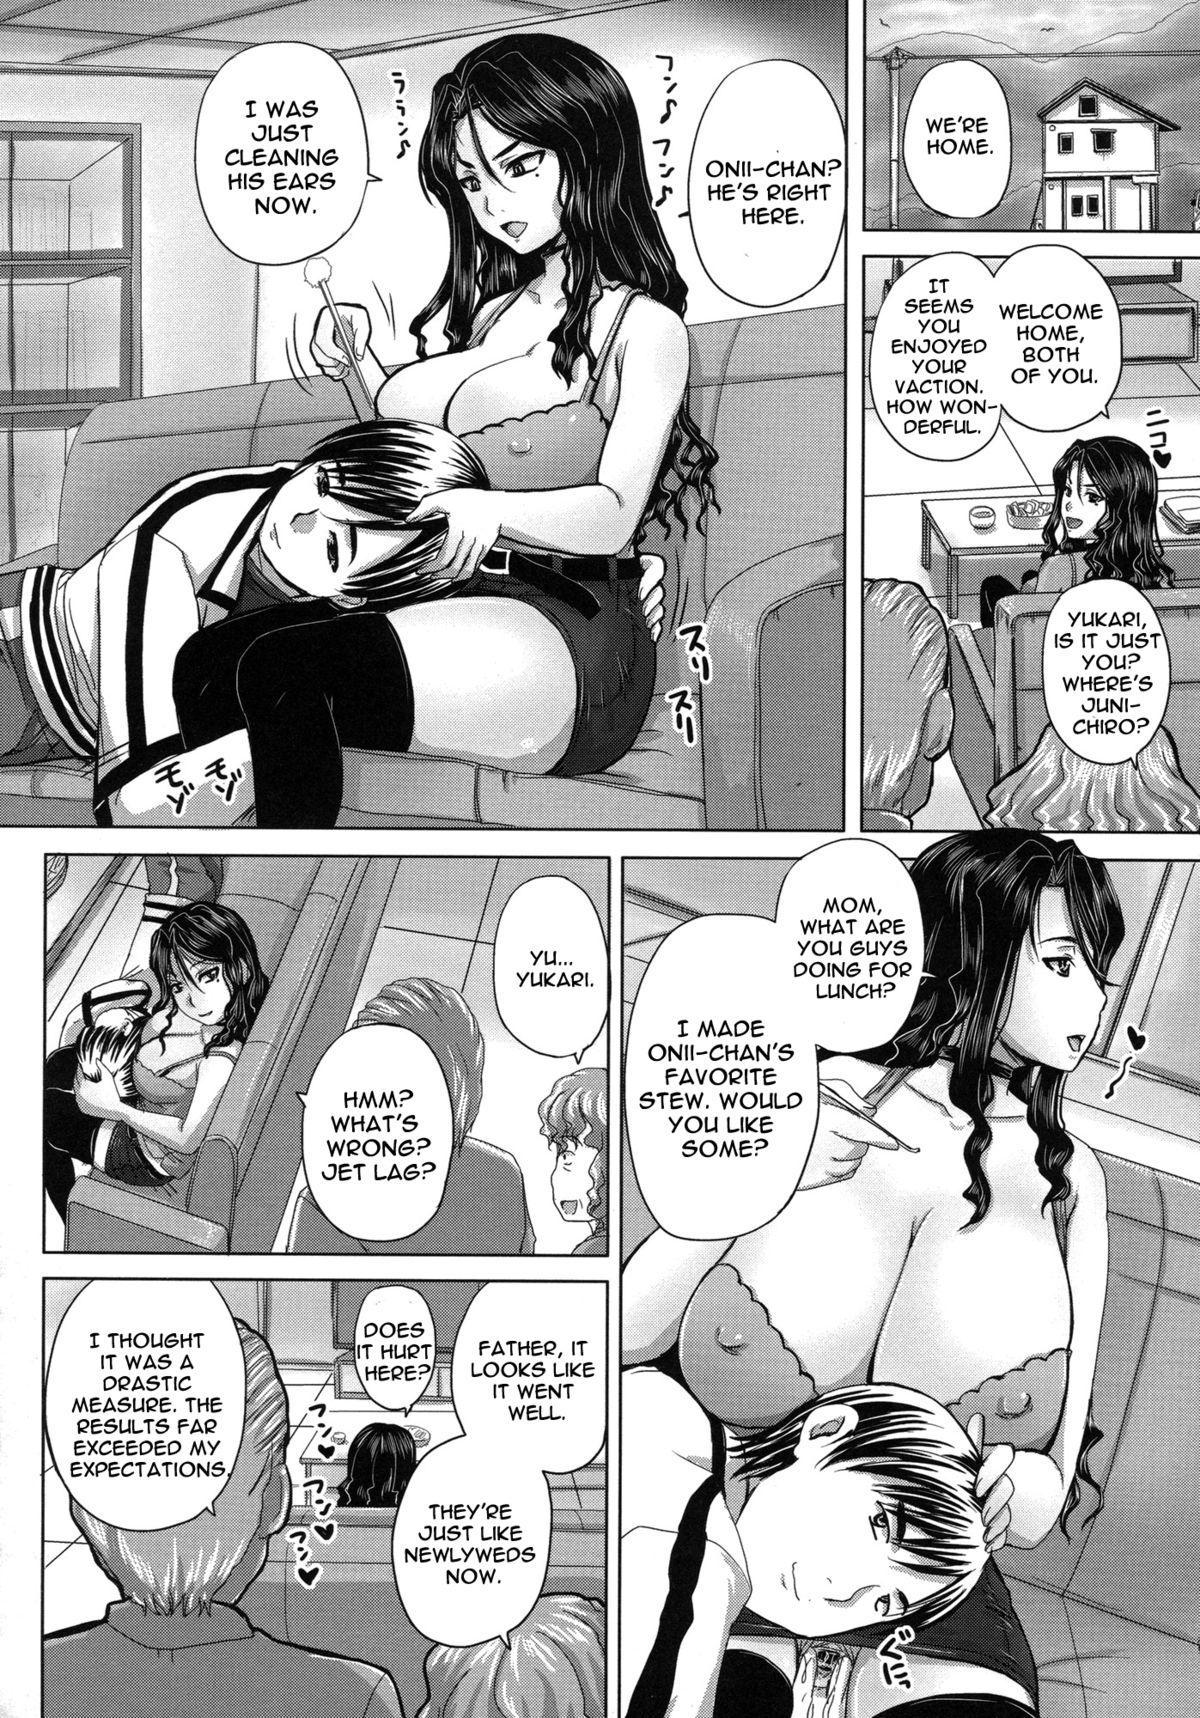 [Akigami Satoru] Tsukurou! Onaho Ane - Let's made a Sex Sleeve from Sister | Turning My Elder-Sister into a Sex-Sleeve [English] {doujin-moe.us} 155